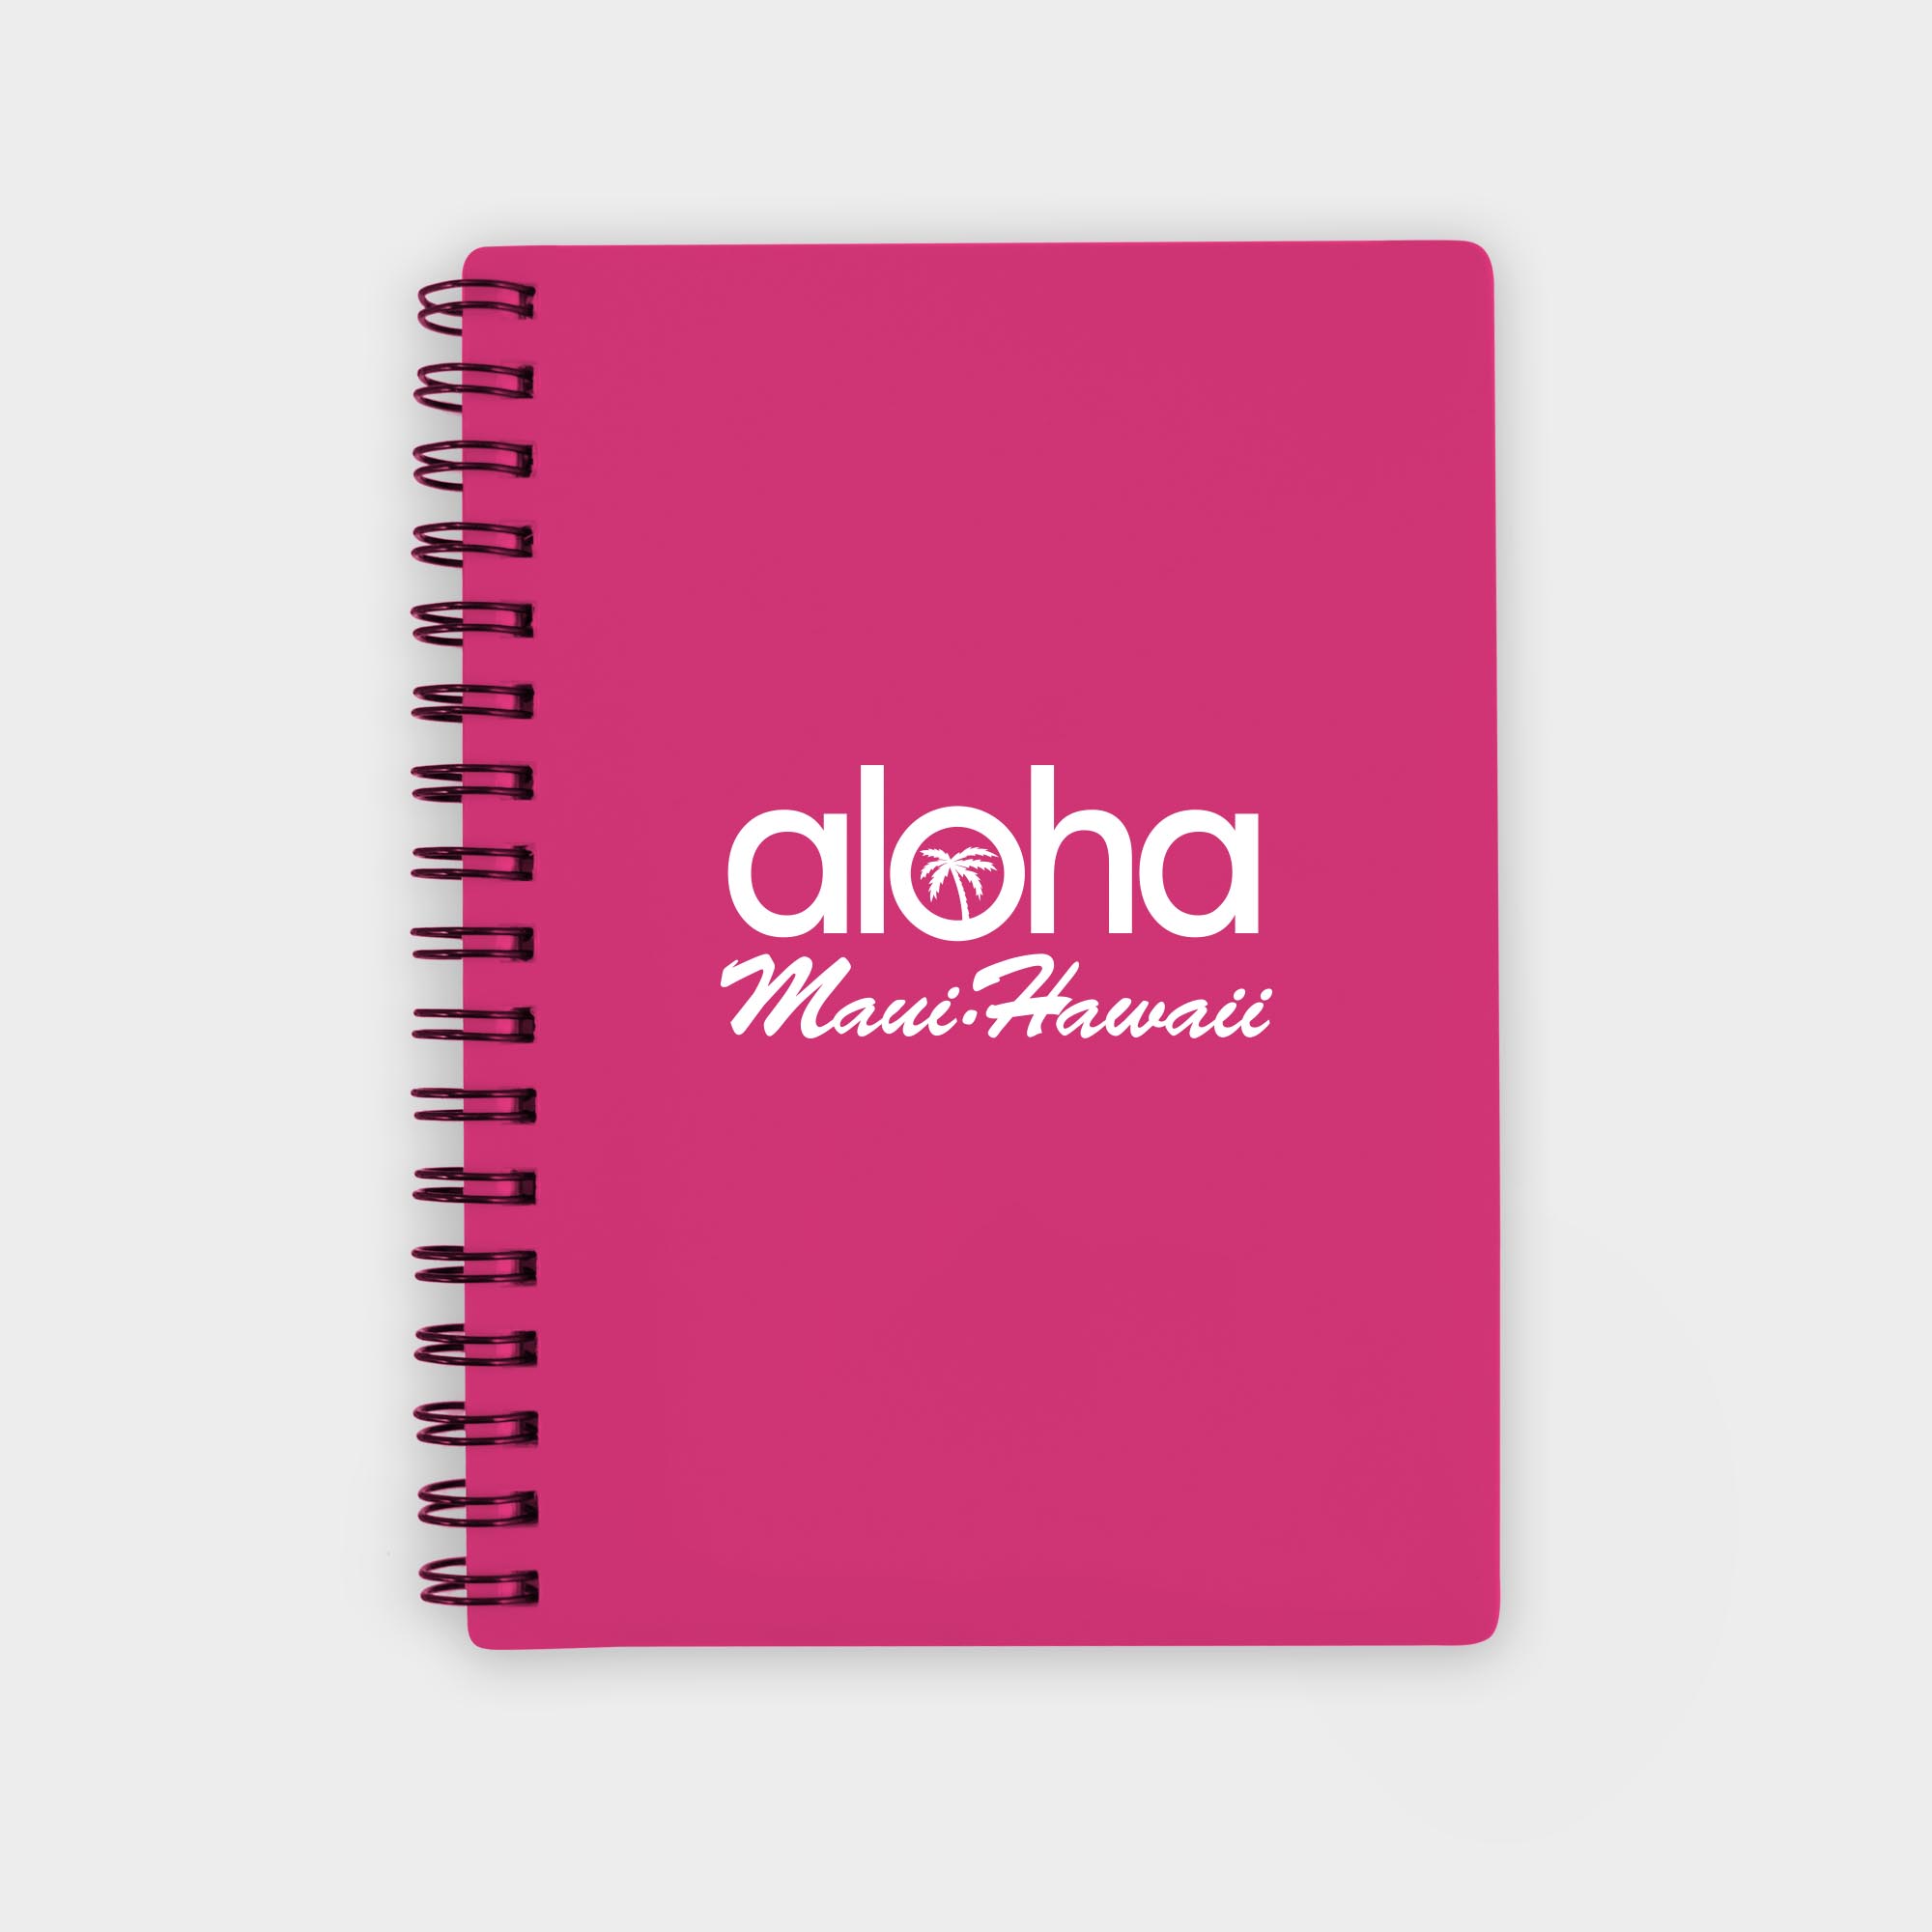 The Green & Good Polypropylene Notebook comes with recycled paper - size A6. The front and back cover is made from recycled polypropylene (500 microns), the sheets are 80gsm. Comes wirebound with 50 sheets as standard. Please contact us if you require a bespoke number of sheets. Pink